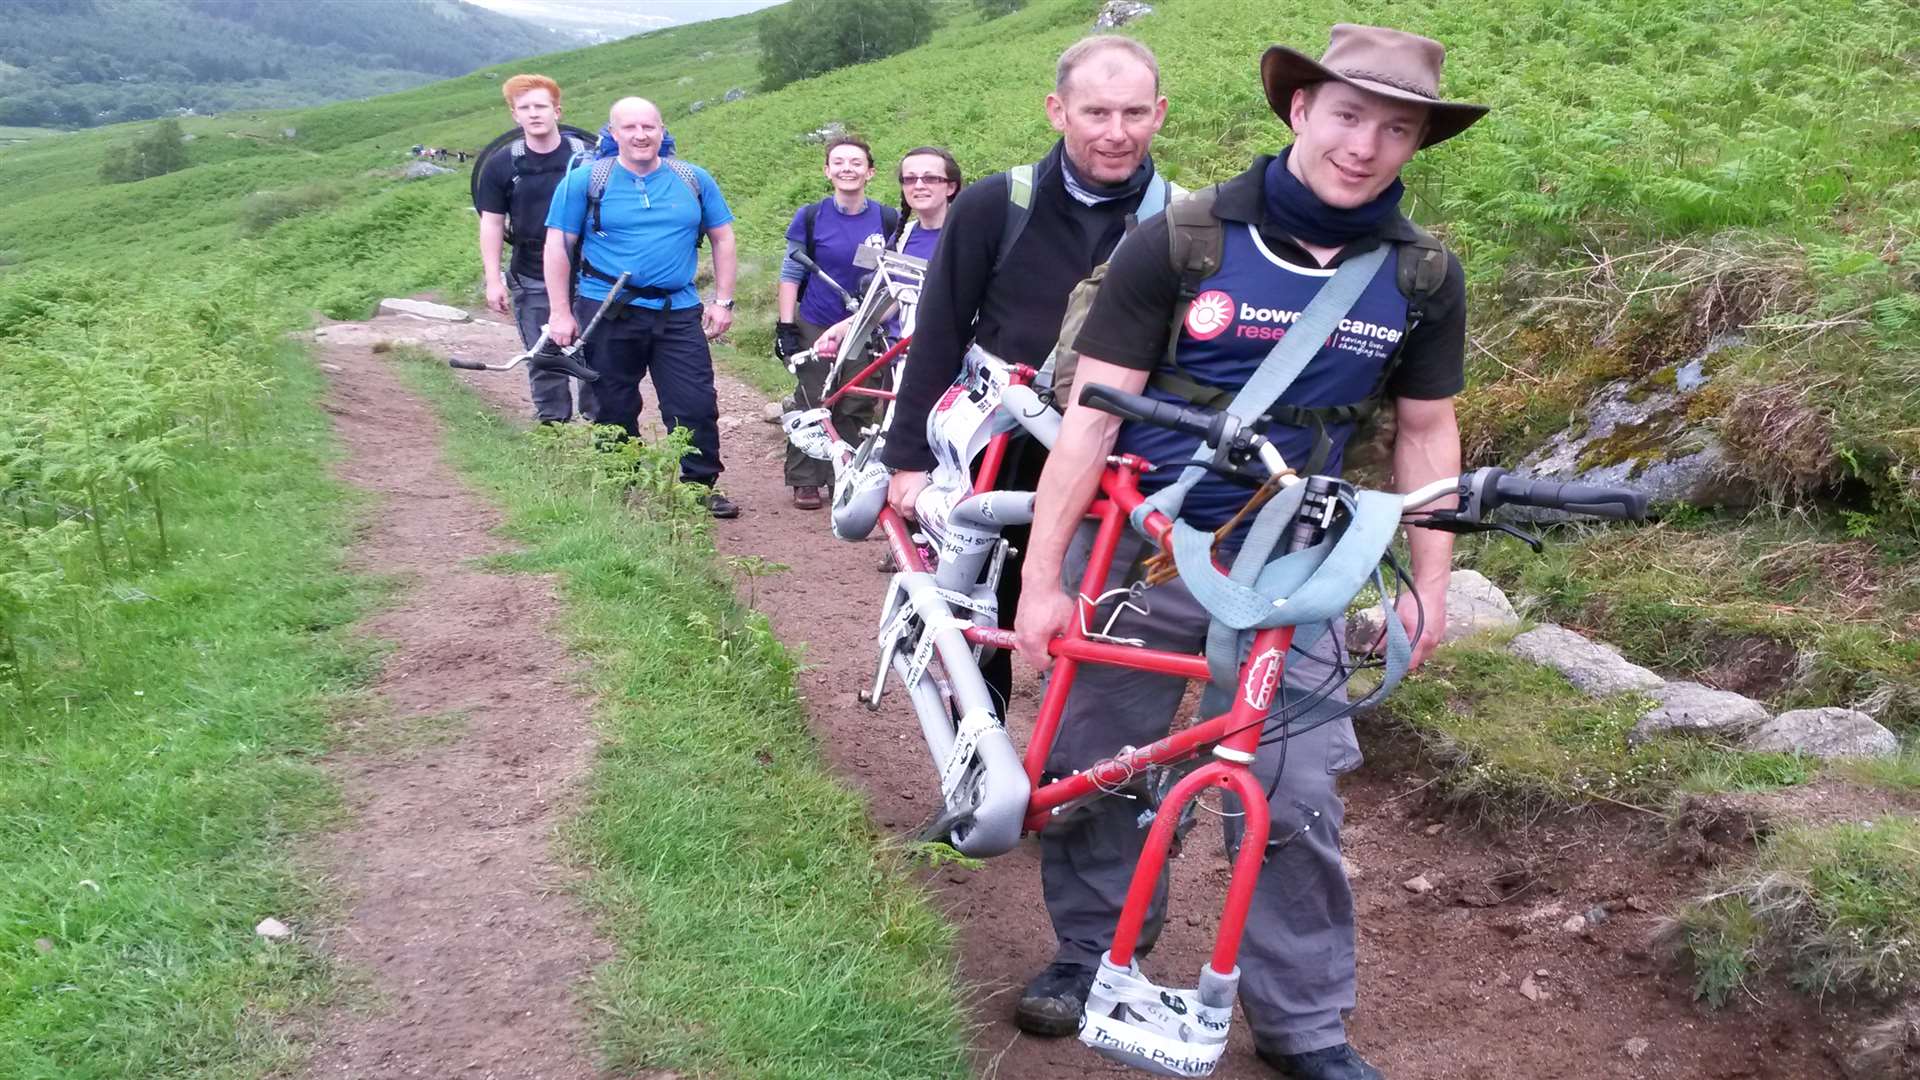 They stripped the bike down to carry it up the mountain.